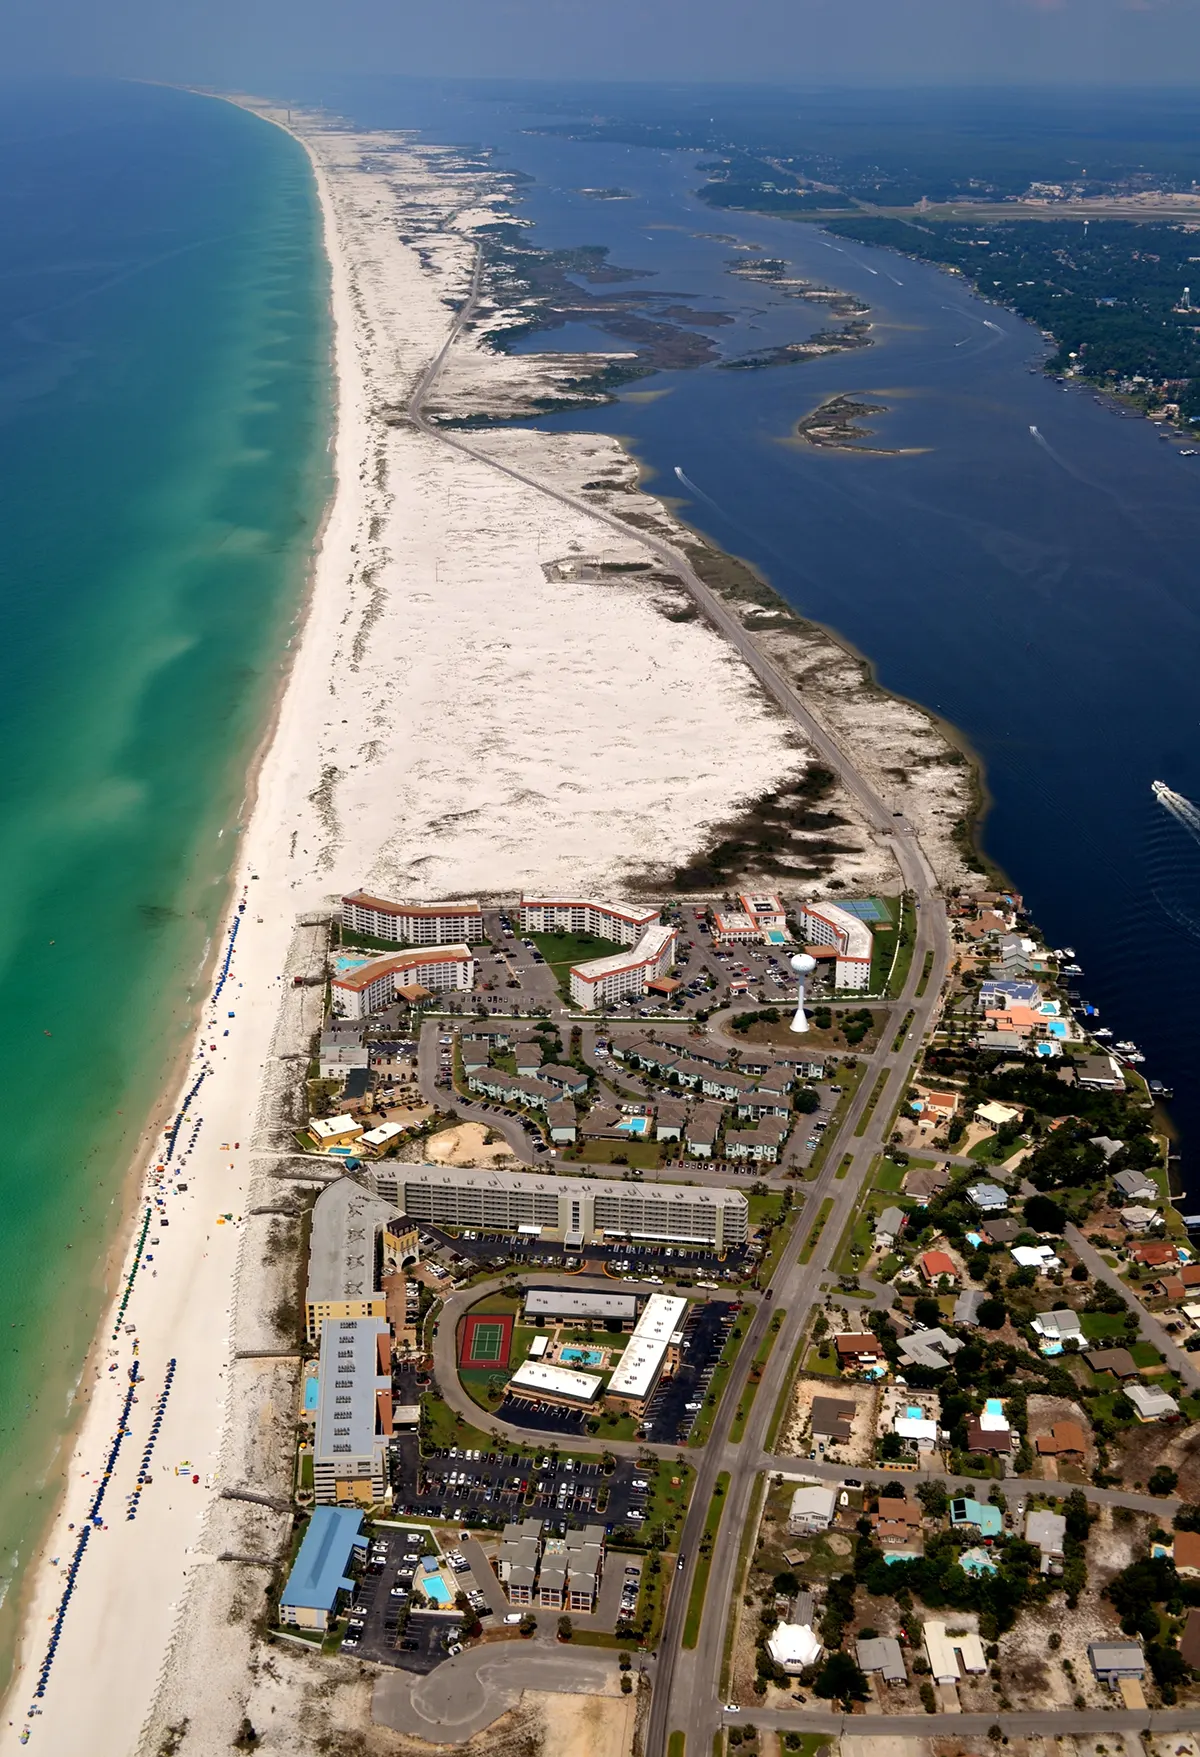 Sky View of City Bridge Over Water | Furnace Repair in Fort Walton Beach | Emerald Coast Air Conditioning and Heating | AirConditioningRepairPensacola.com